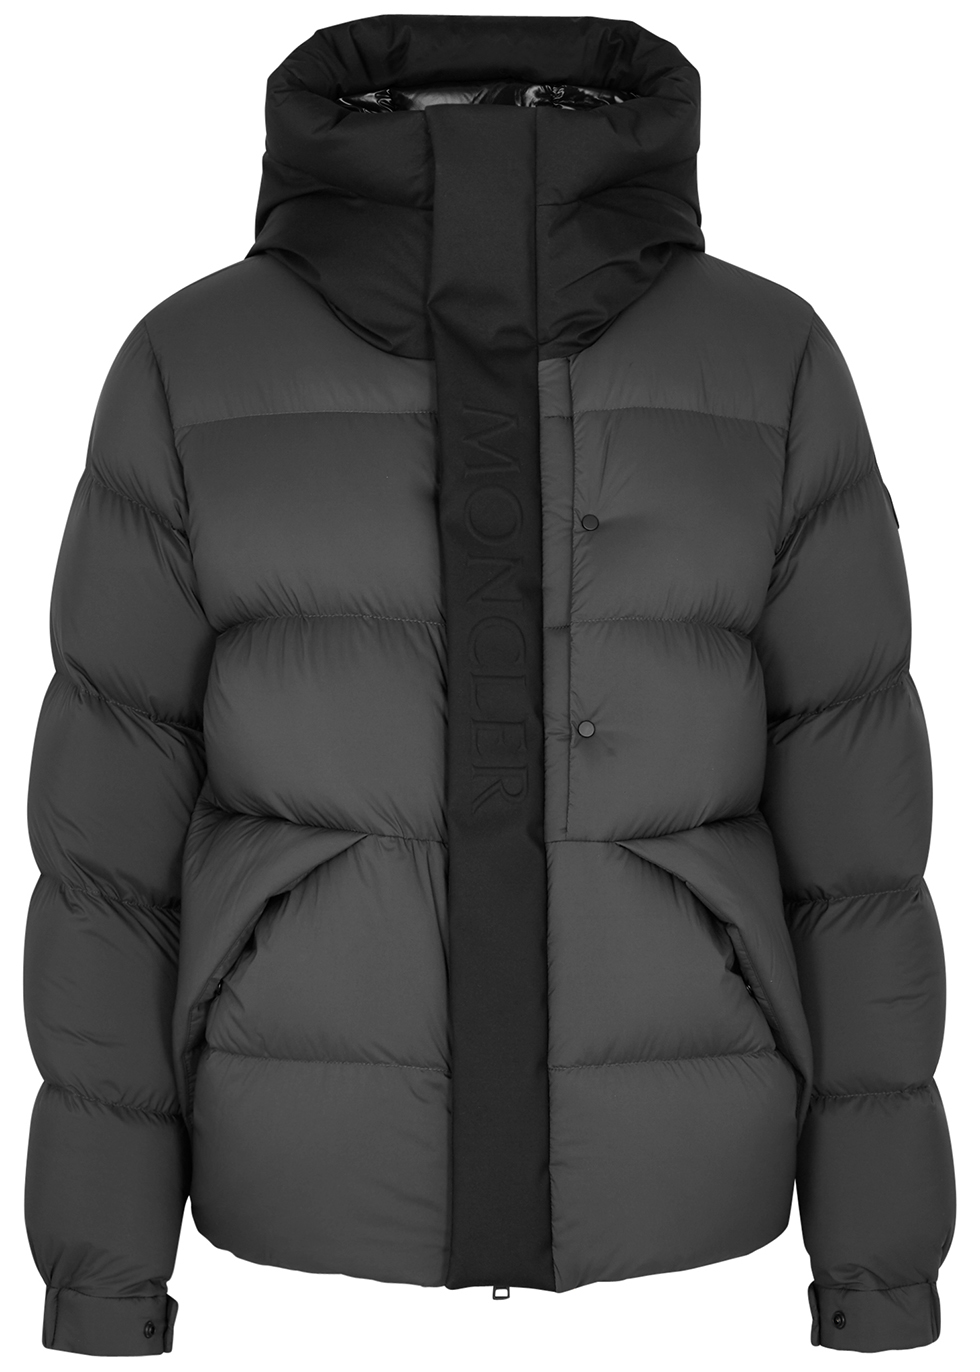 Moncler Madeira grey quilted shell jacket - Harvey Nichols